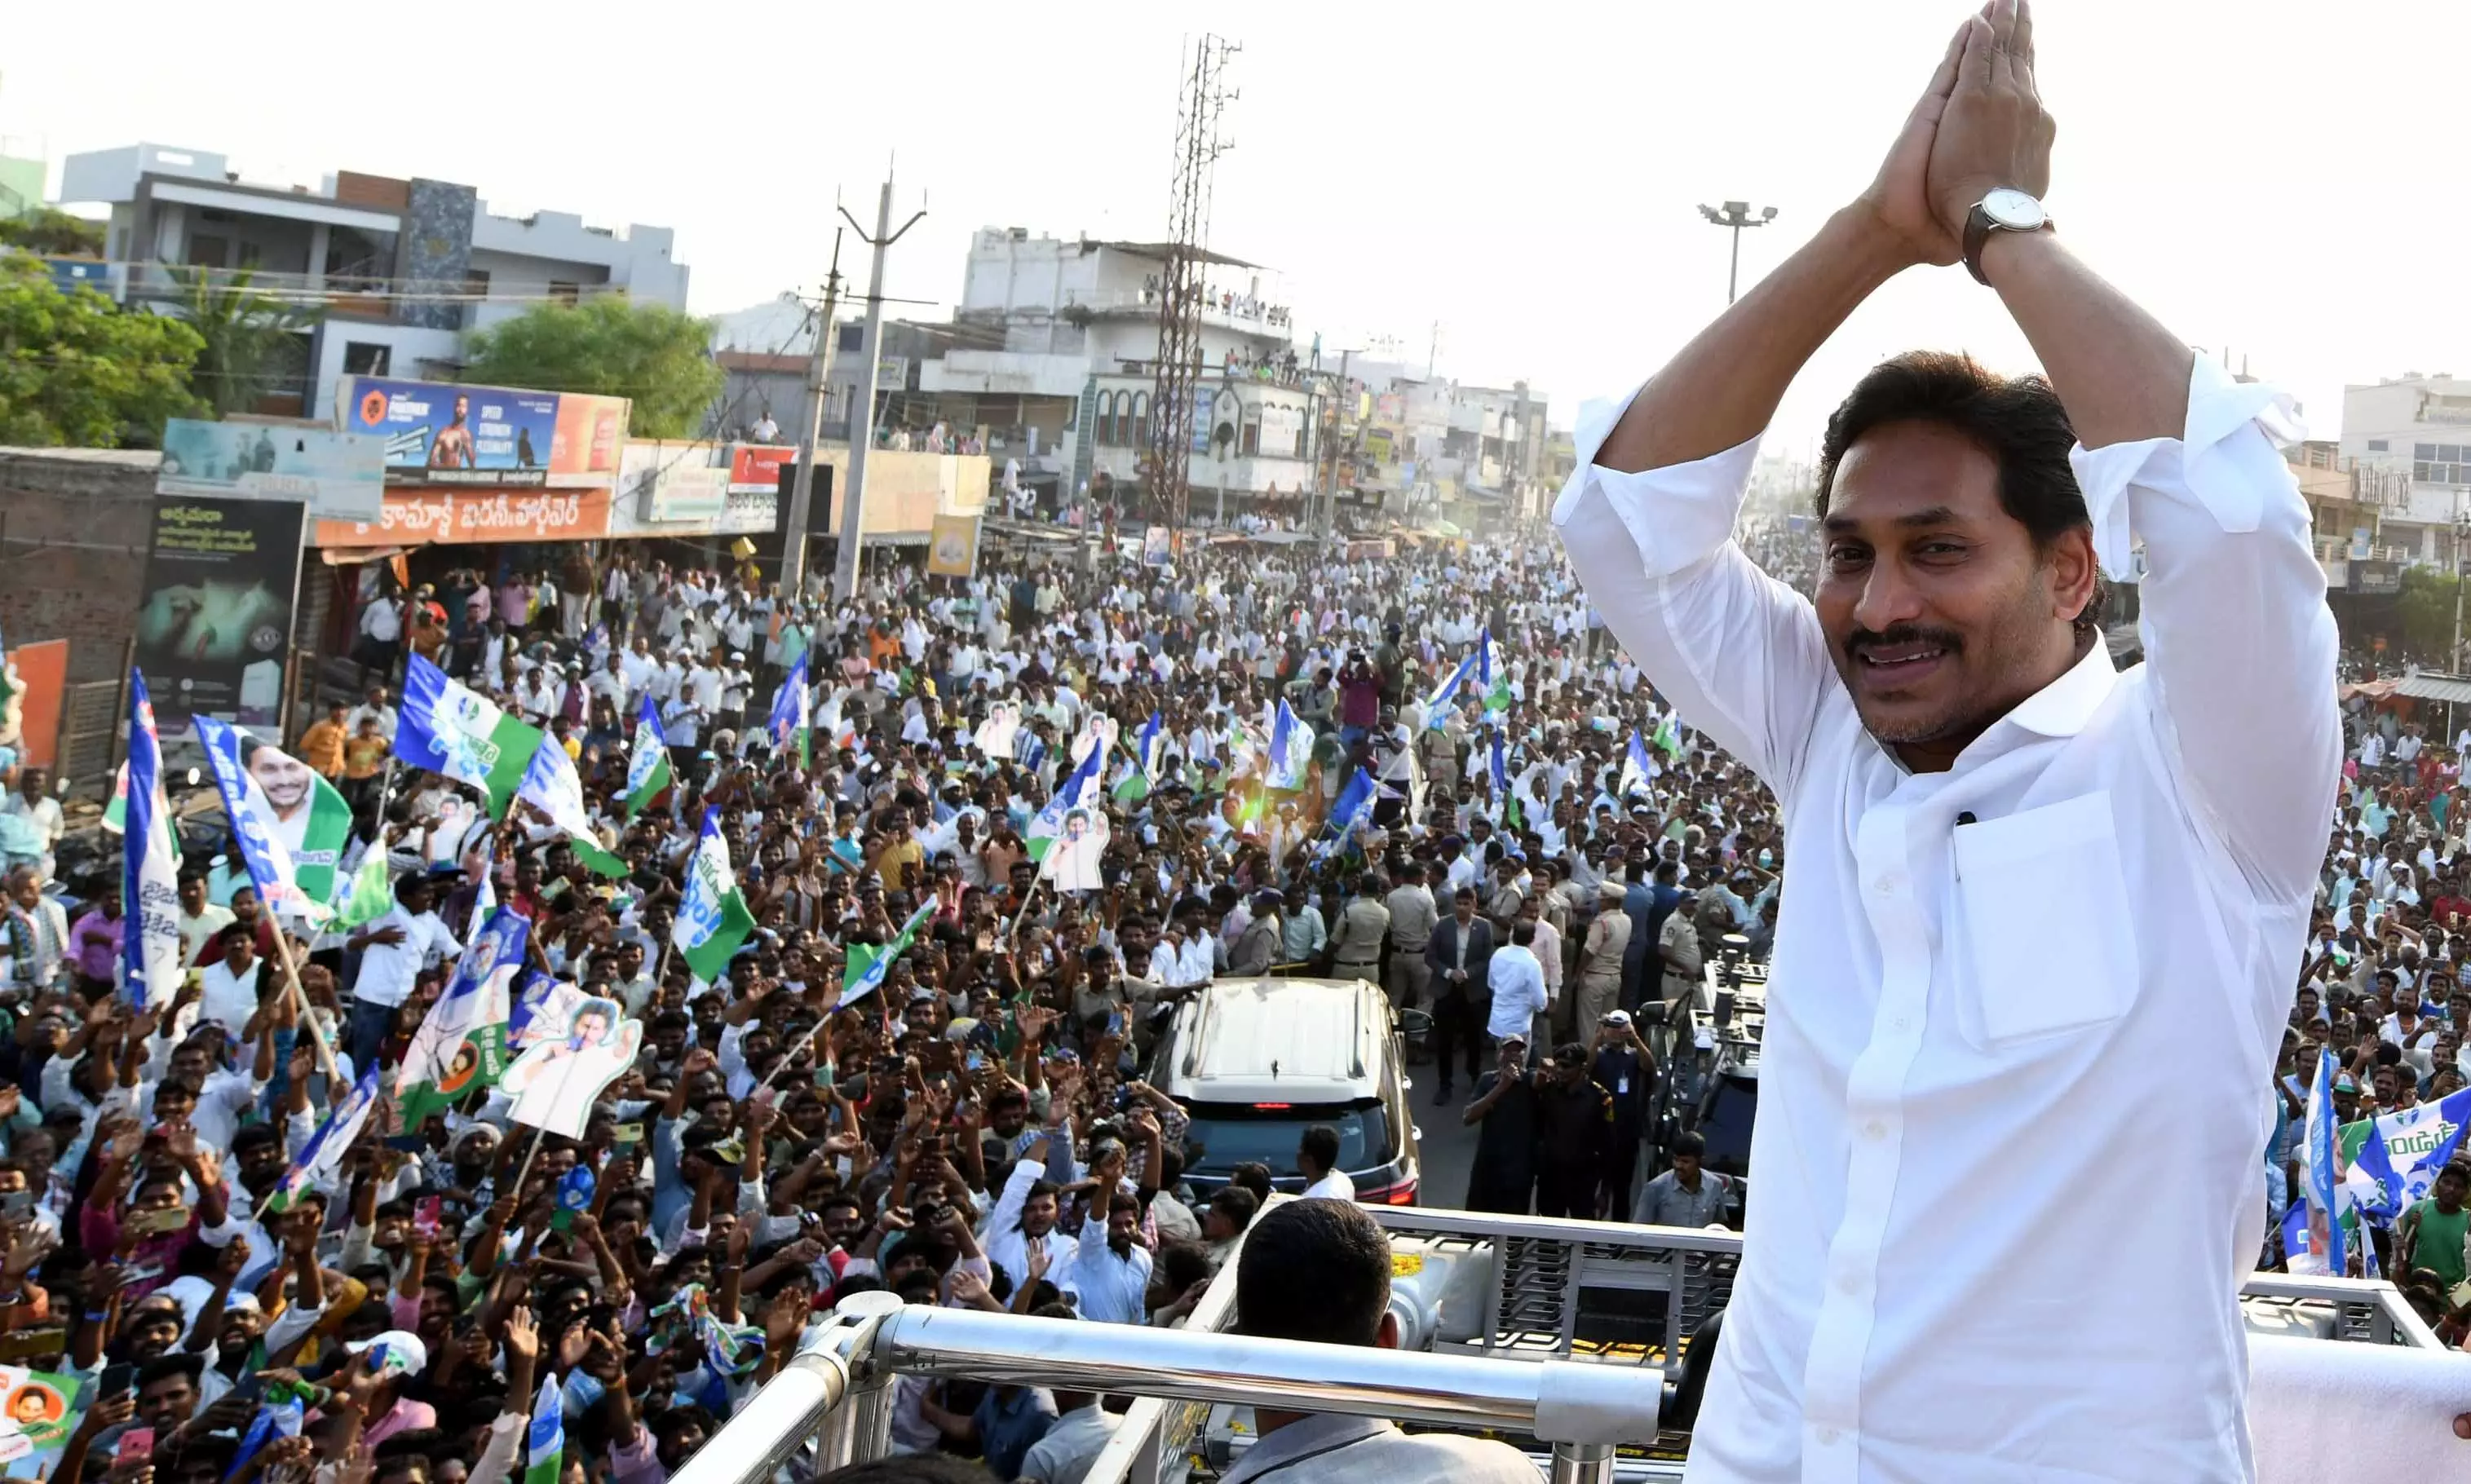 Give a befitting response to JS and BJP: CM Jagan